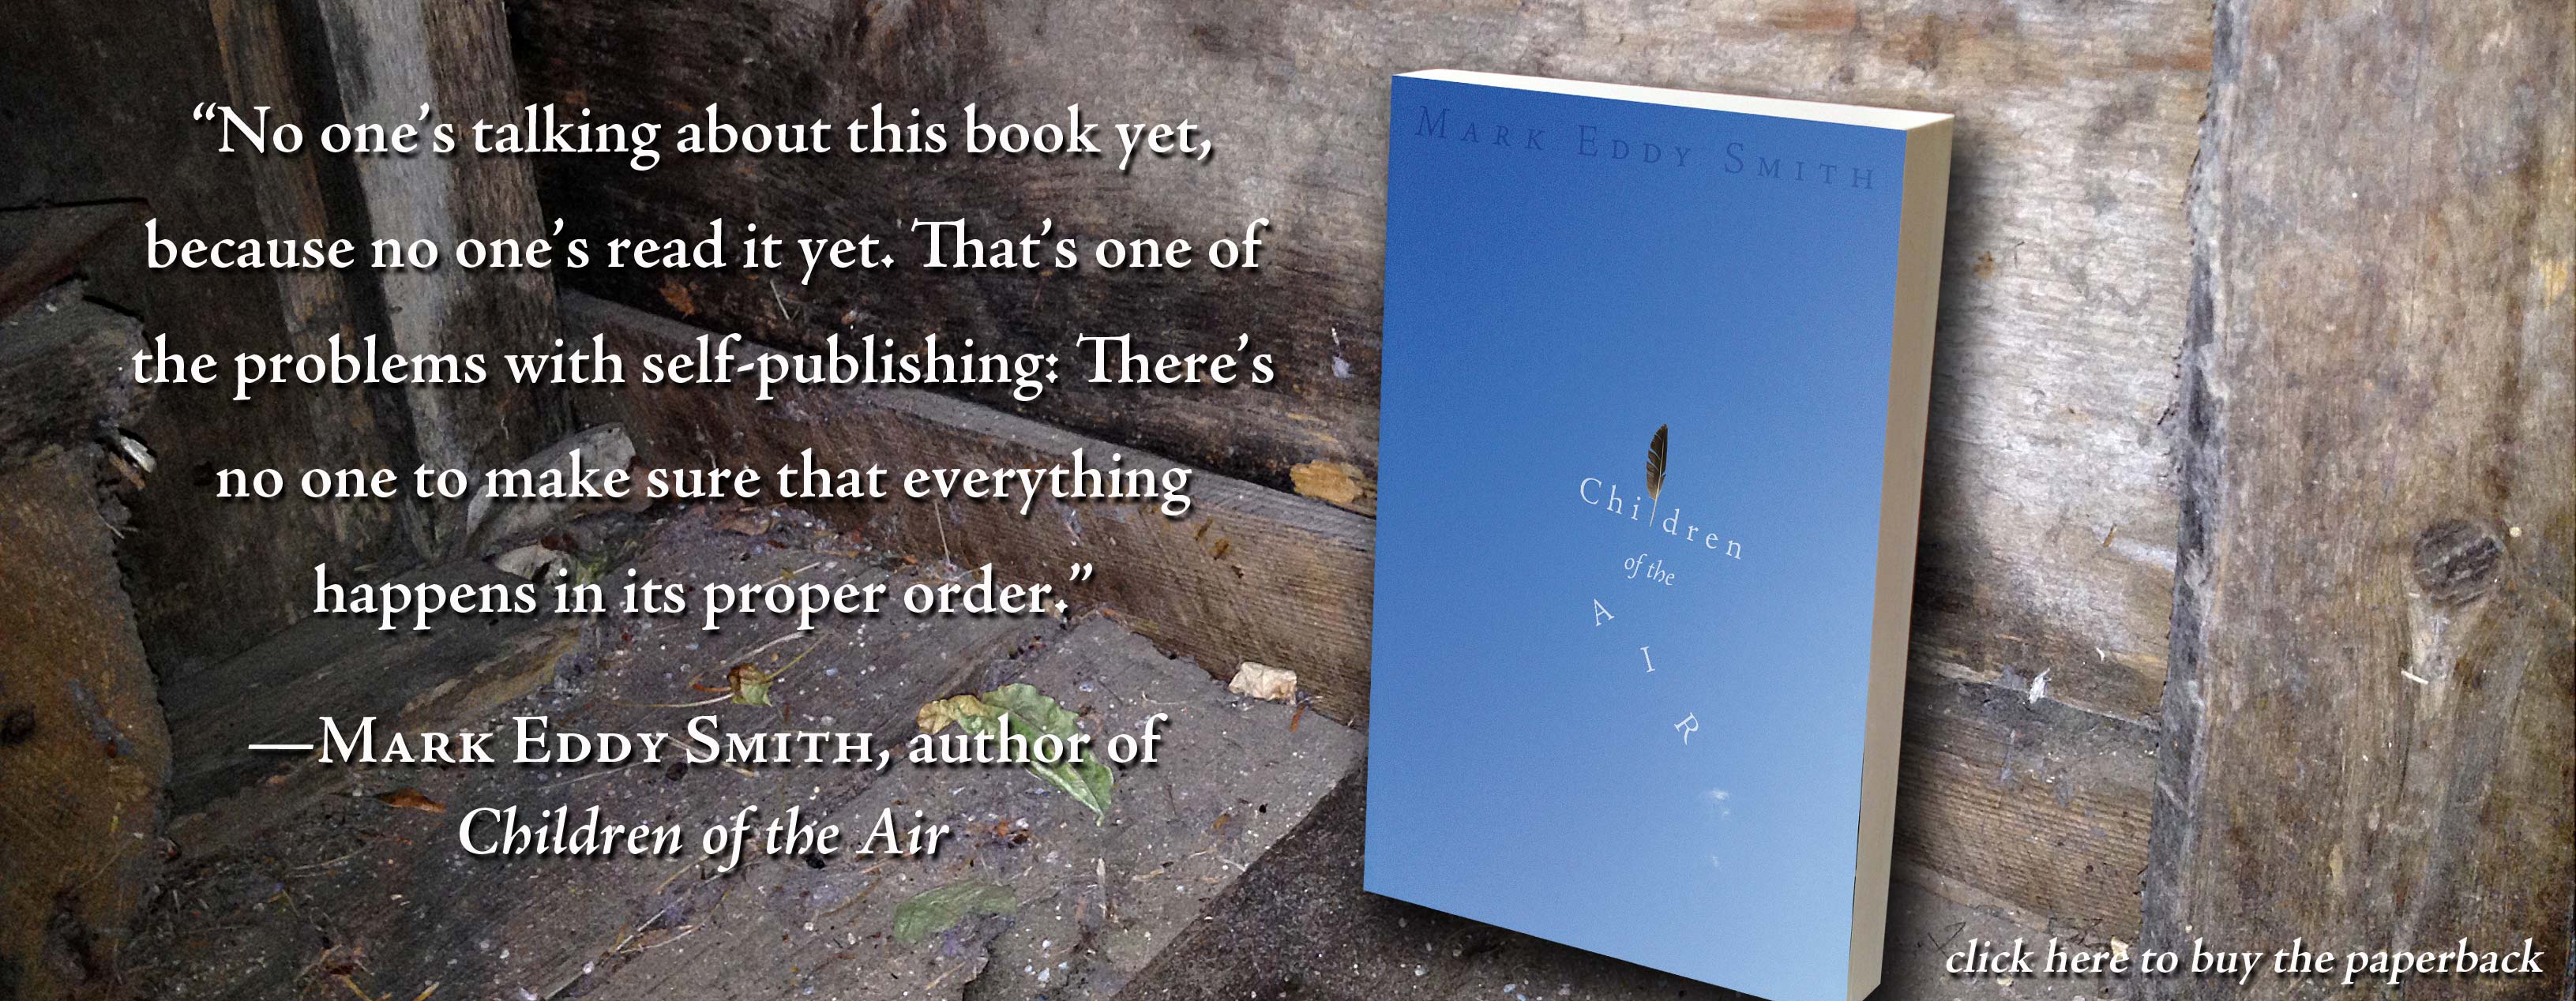 “No one’s talking about this book yet, because no one’s read it yet. That’s one of the problems with self-publishing: There’s no one to make sure that everything happens in its proper order.” —Mark Eddy Smith, author of Children of the Air